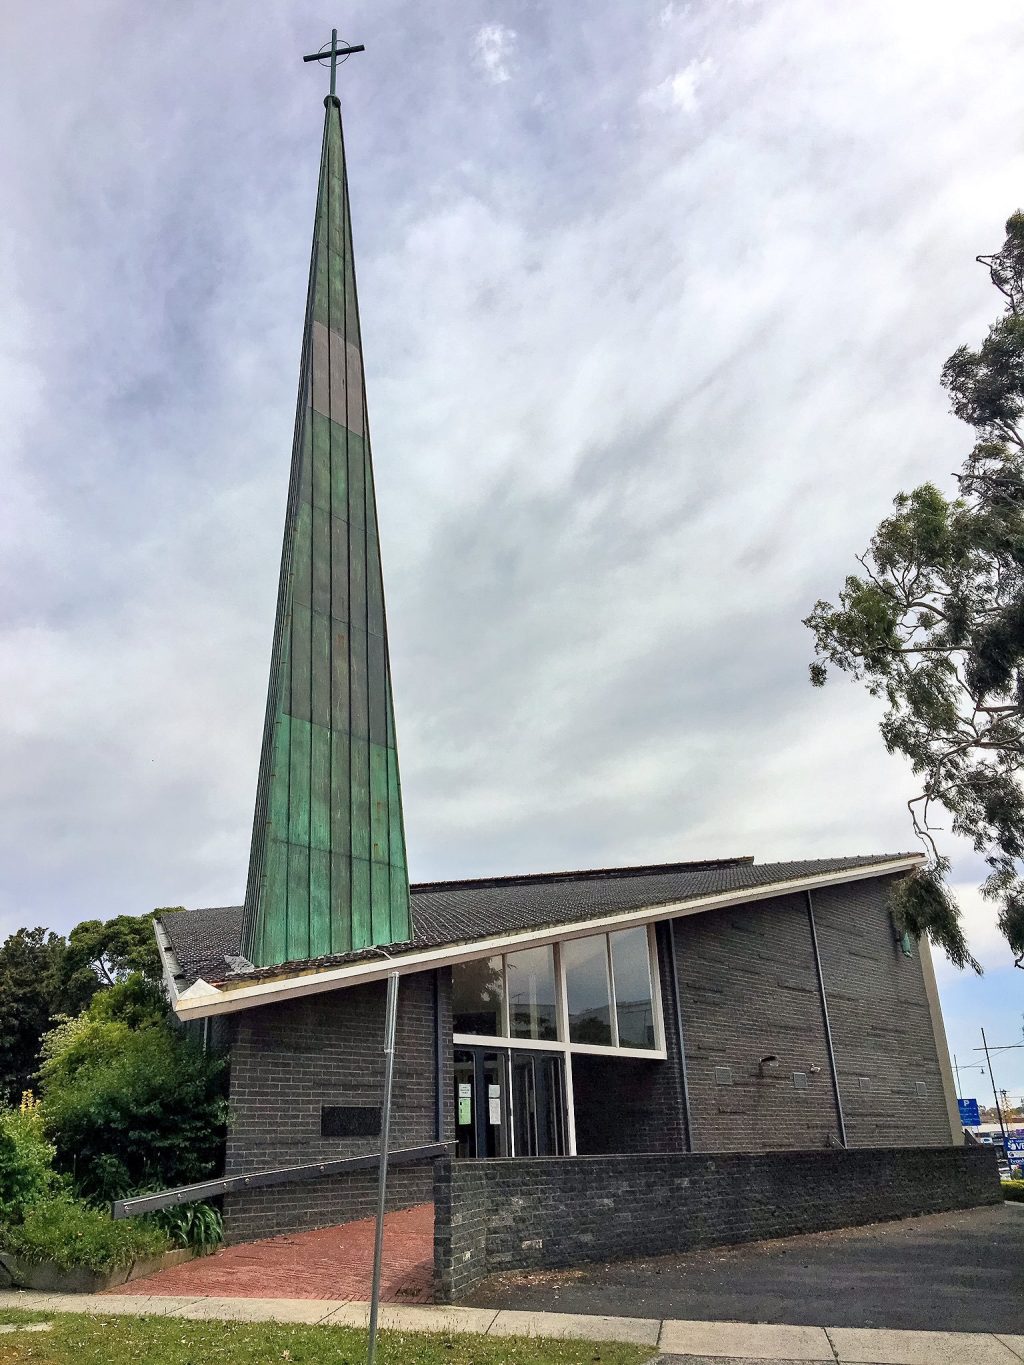 Significant alterations proposed for the historic Mary Immaculate Church, Ivanhoe